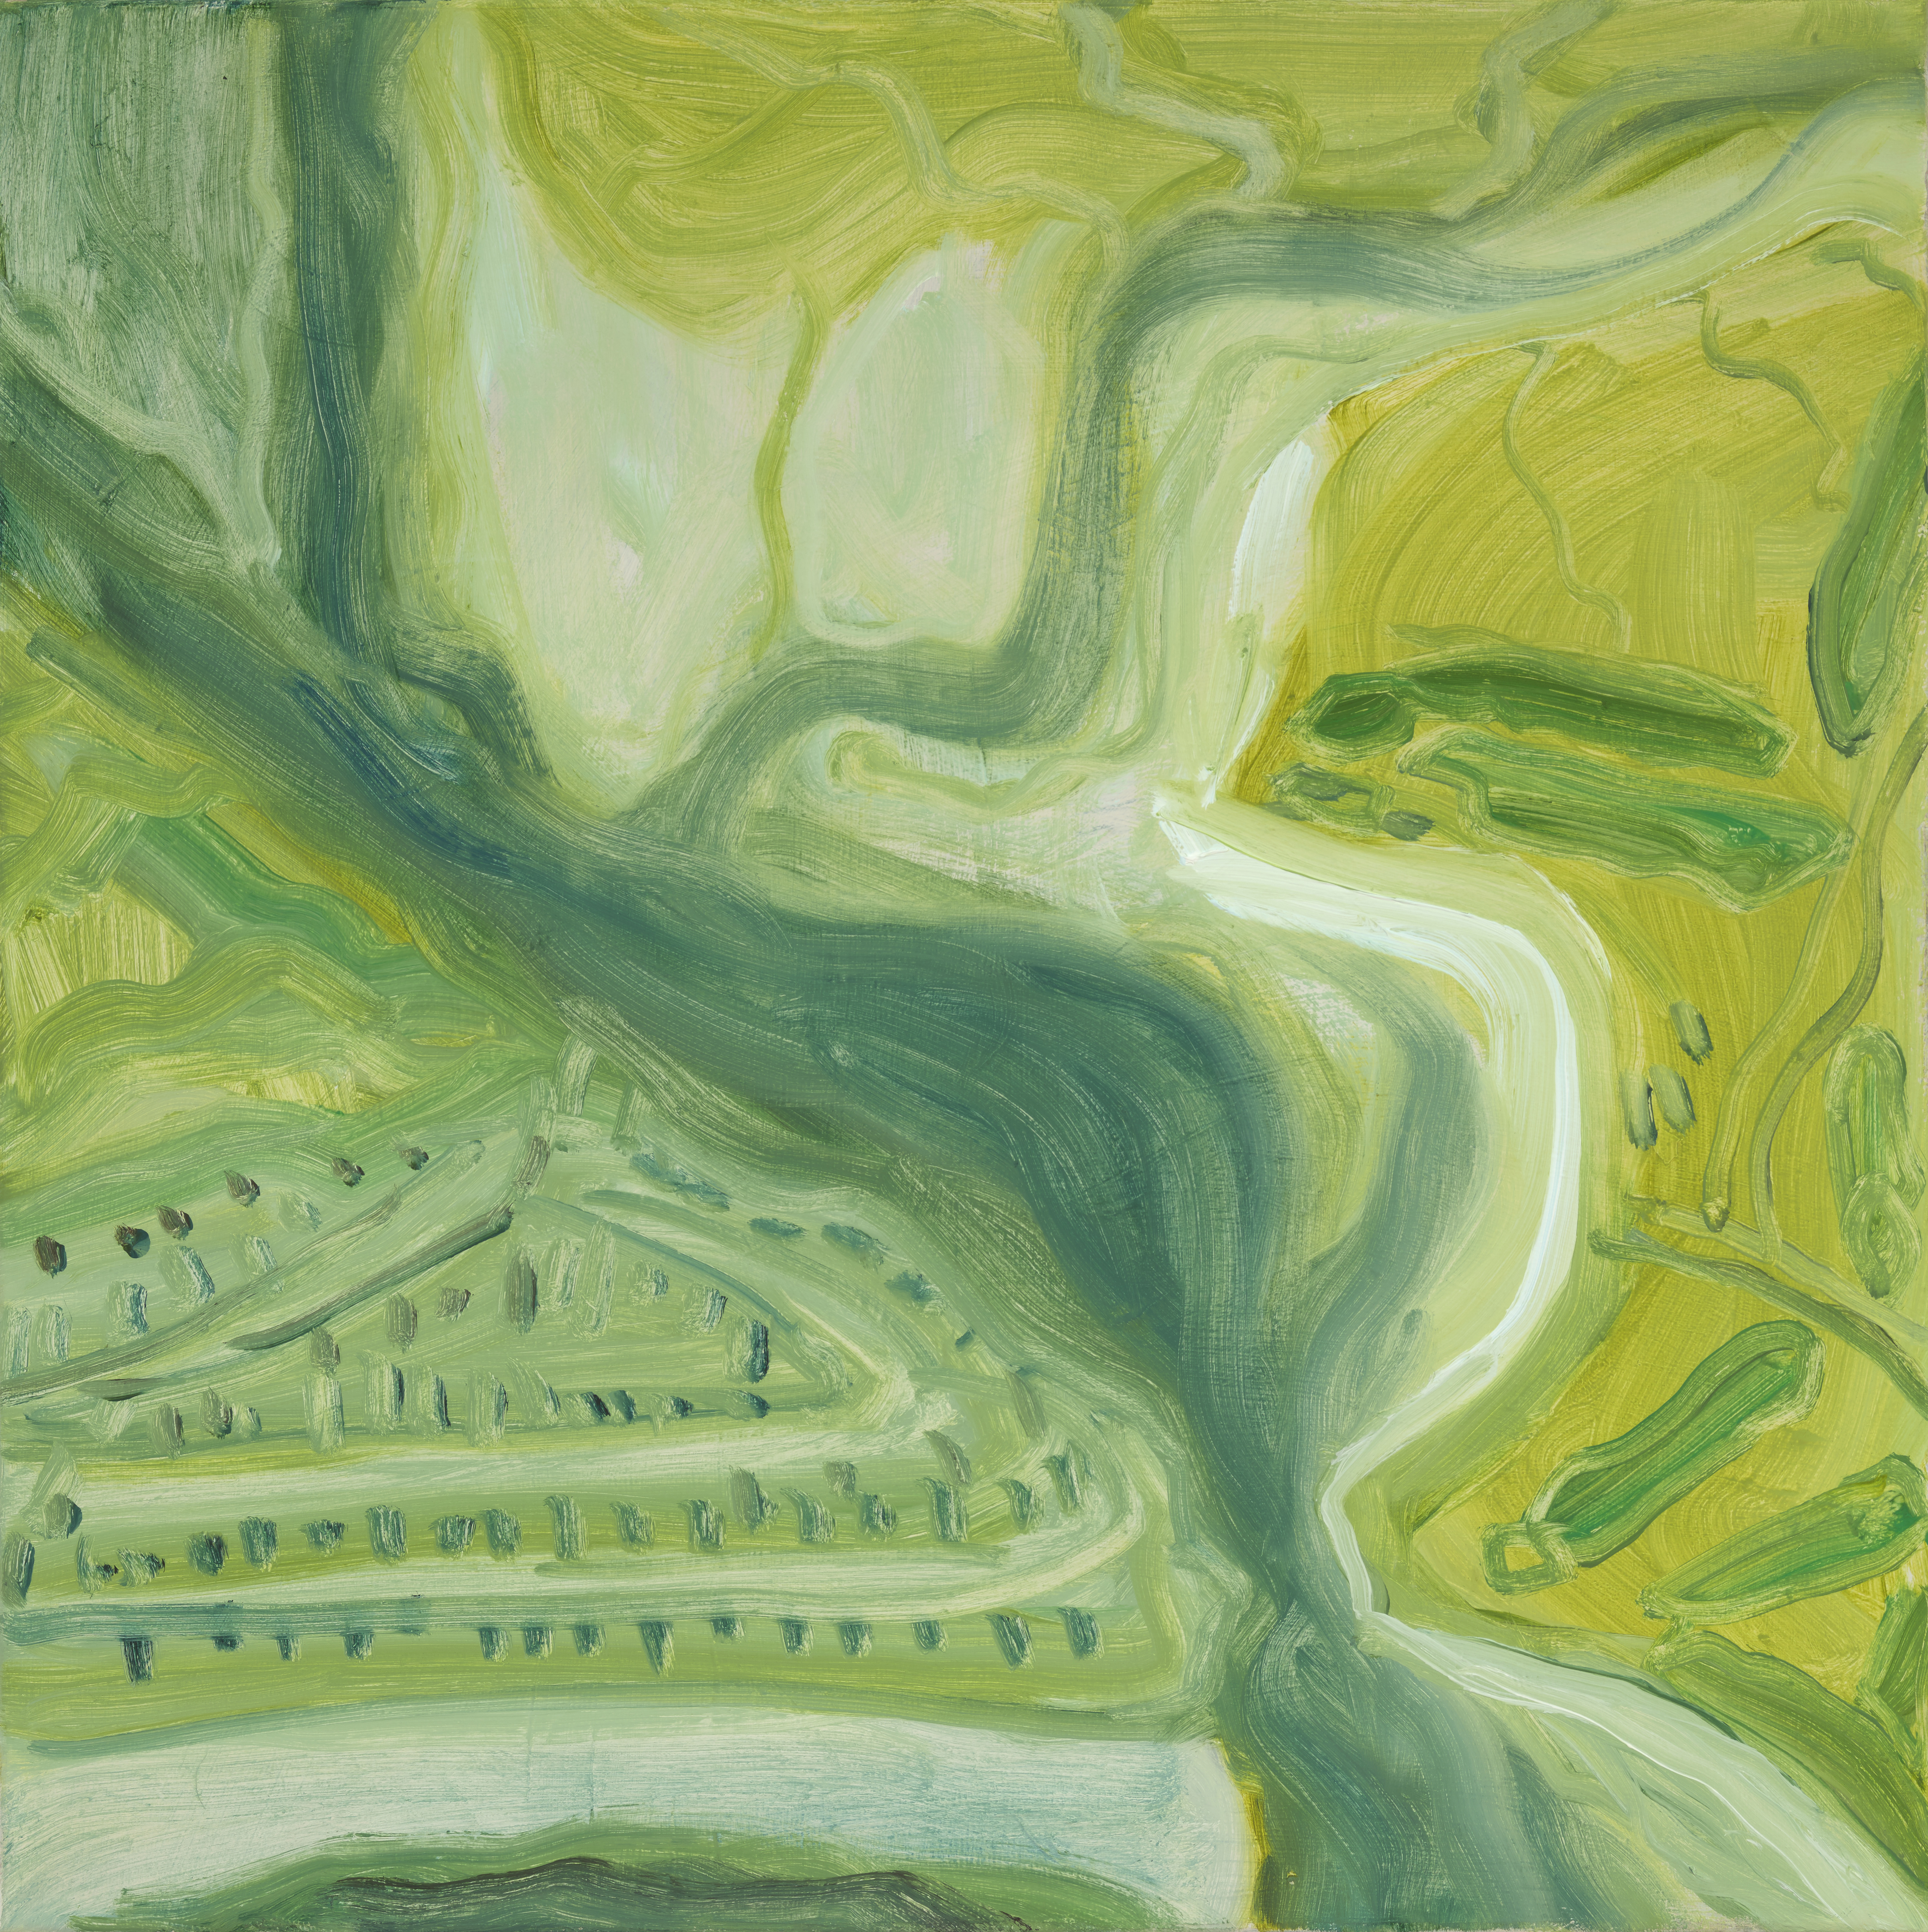 Nonesuch River, 2018, oil on linen, 20 x 20 inches